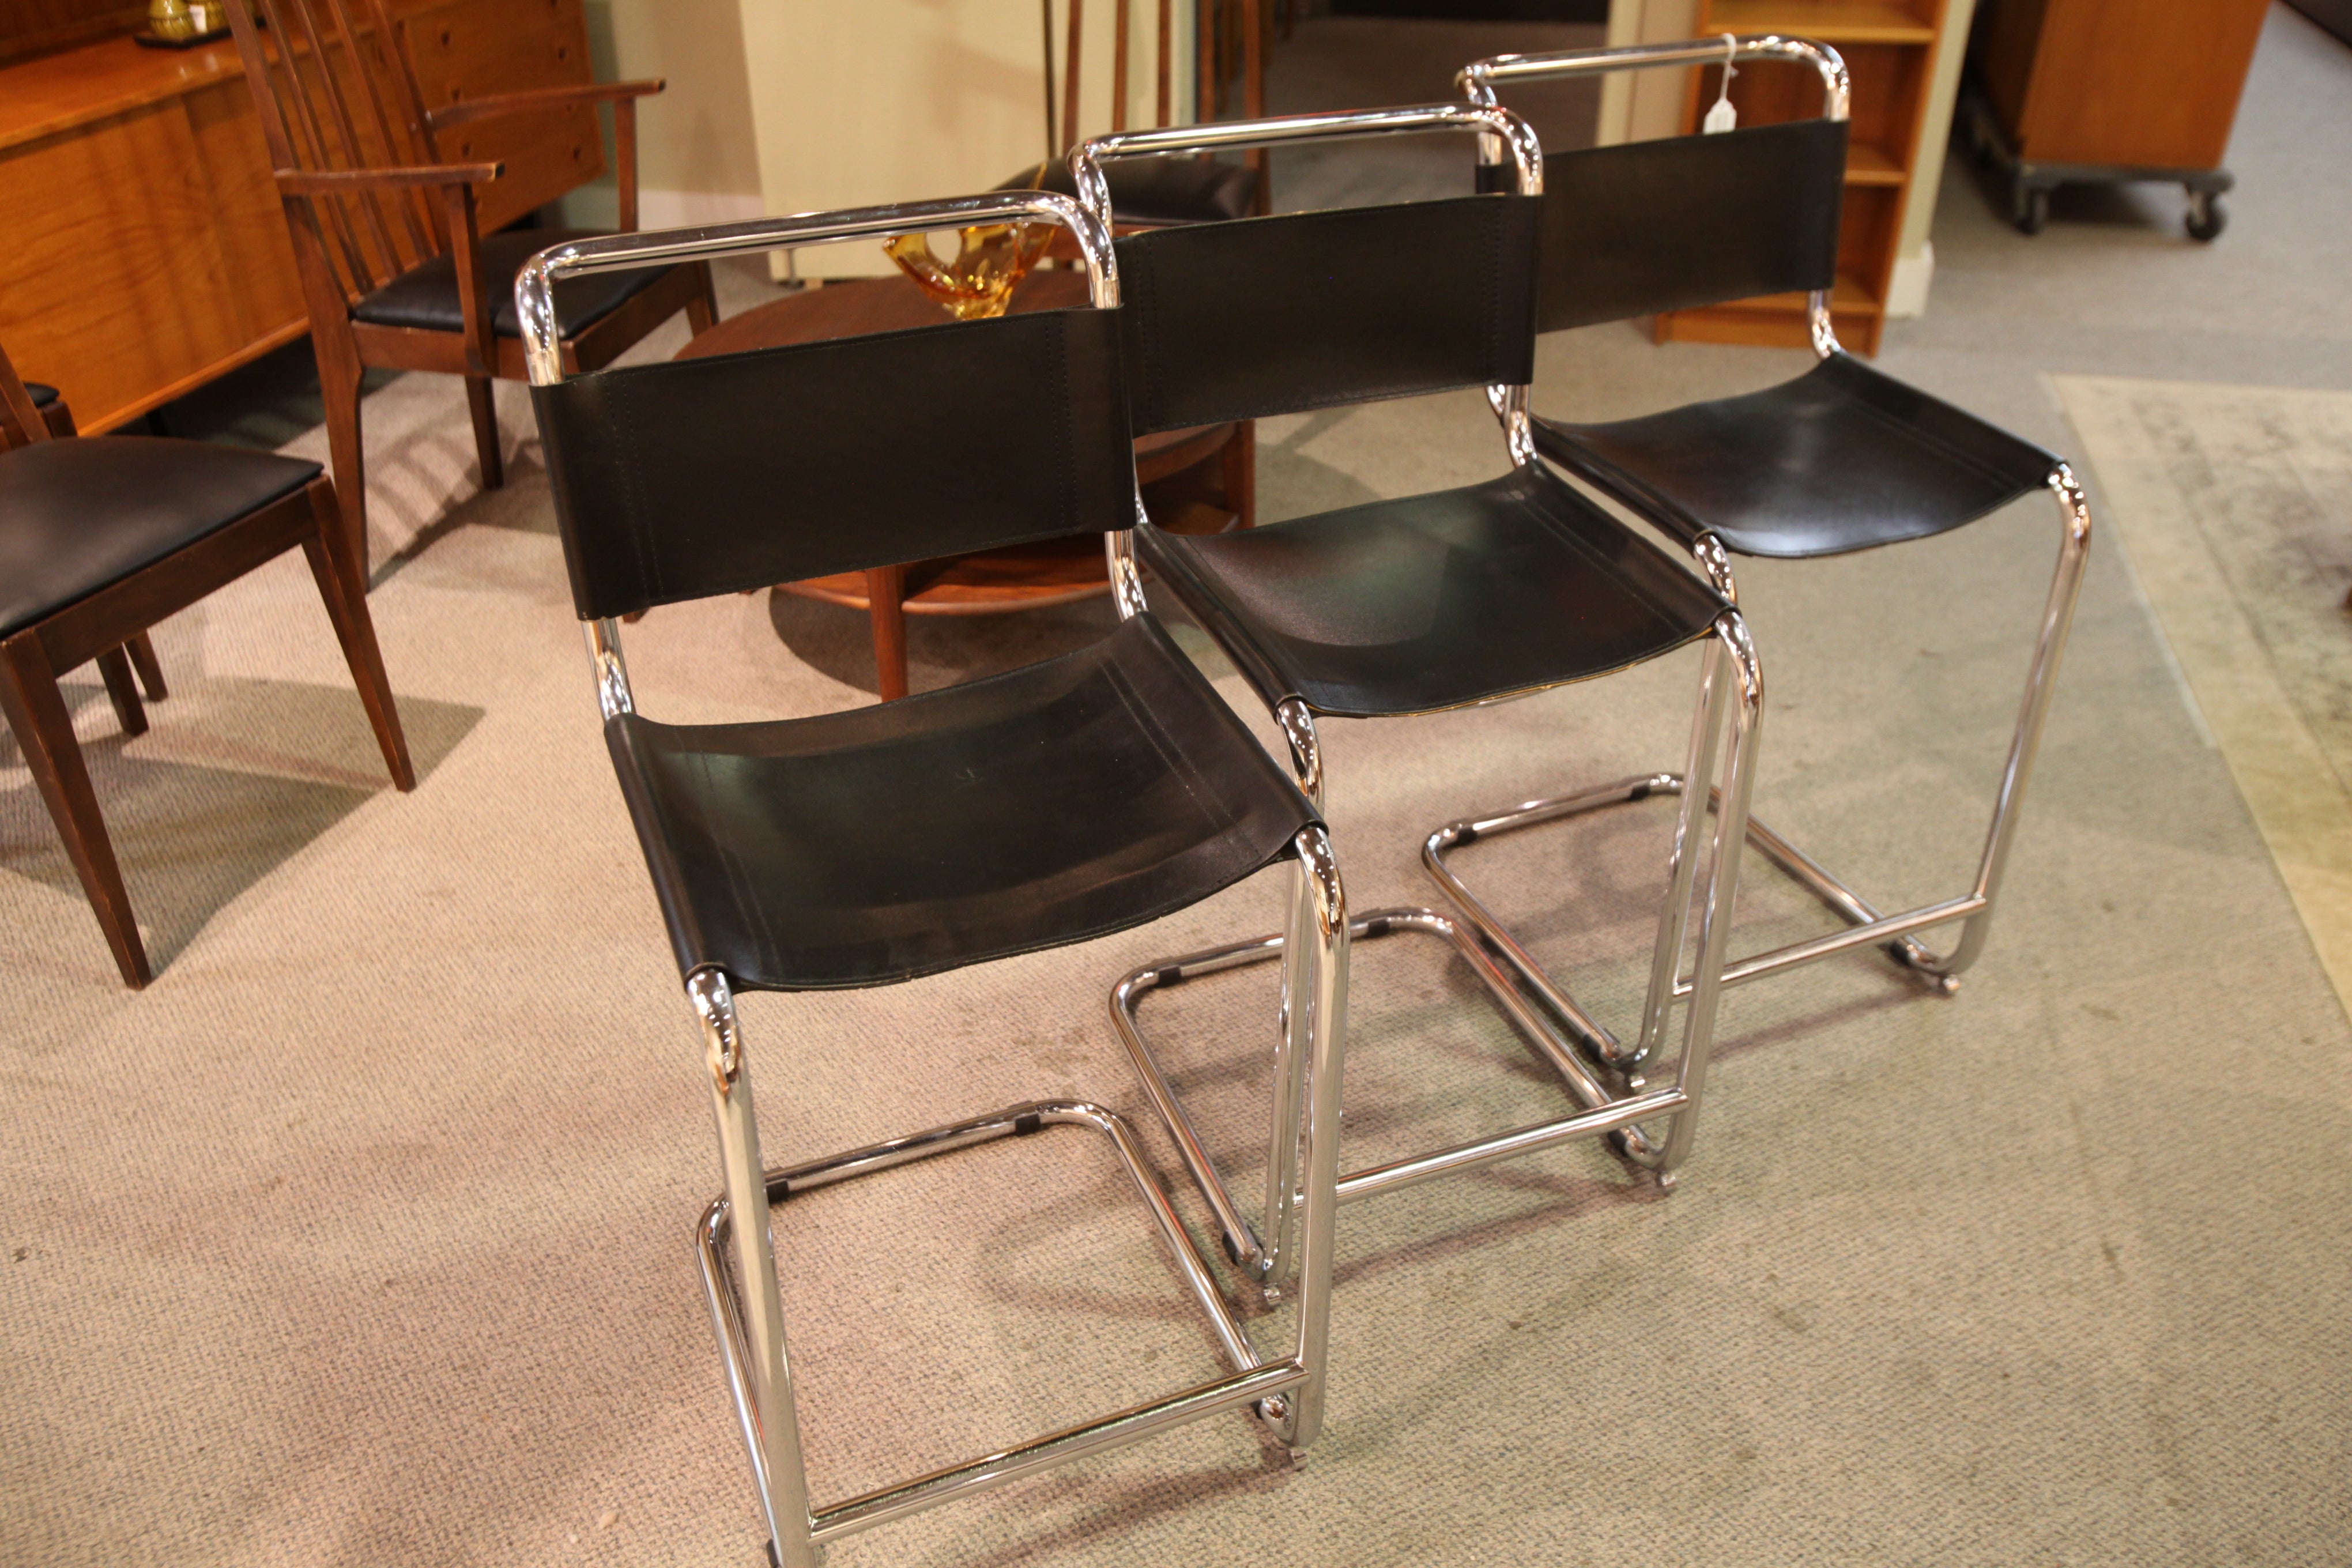 Set of 3 Marcel Breuer Style Leather / Chrome Stools  (seat 23"H)